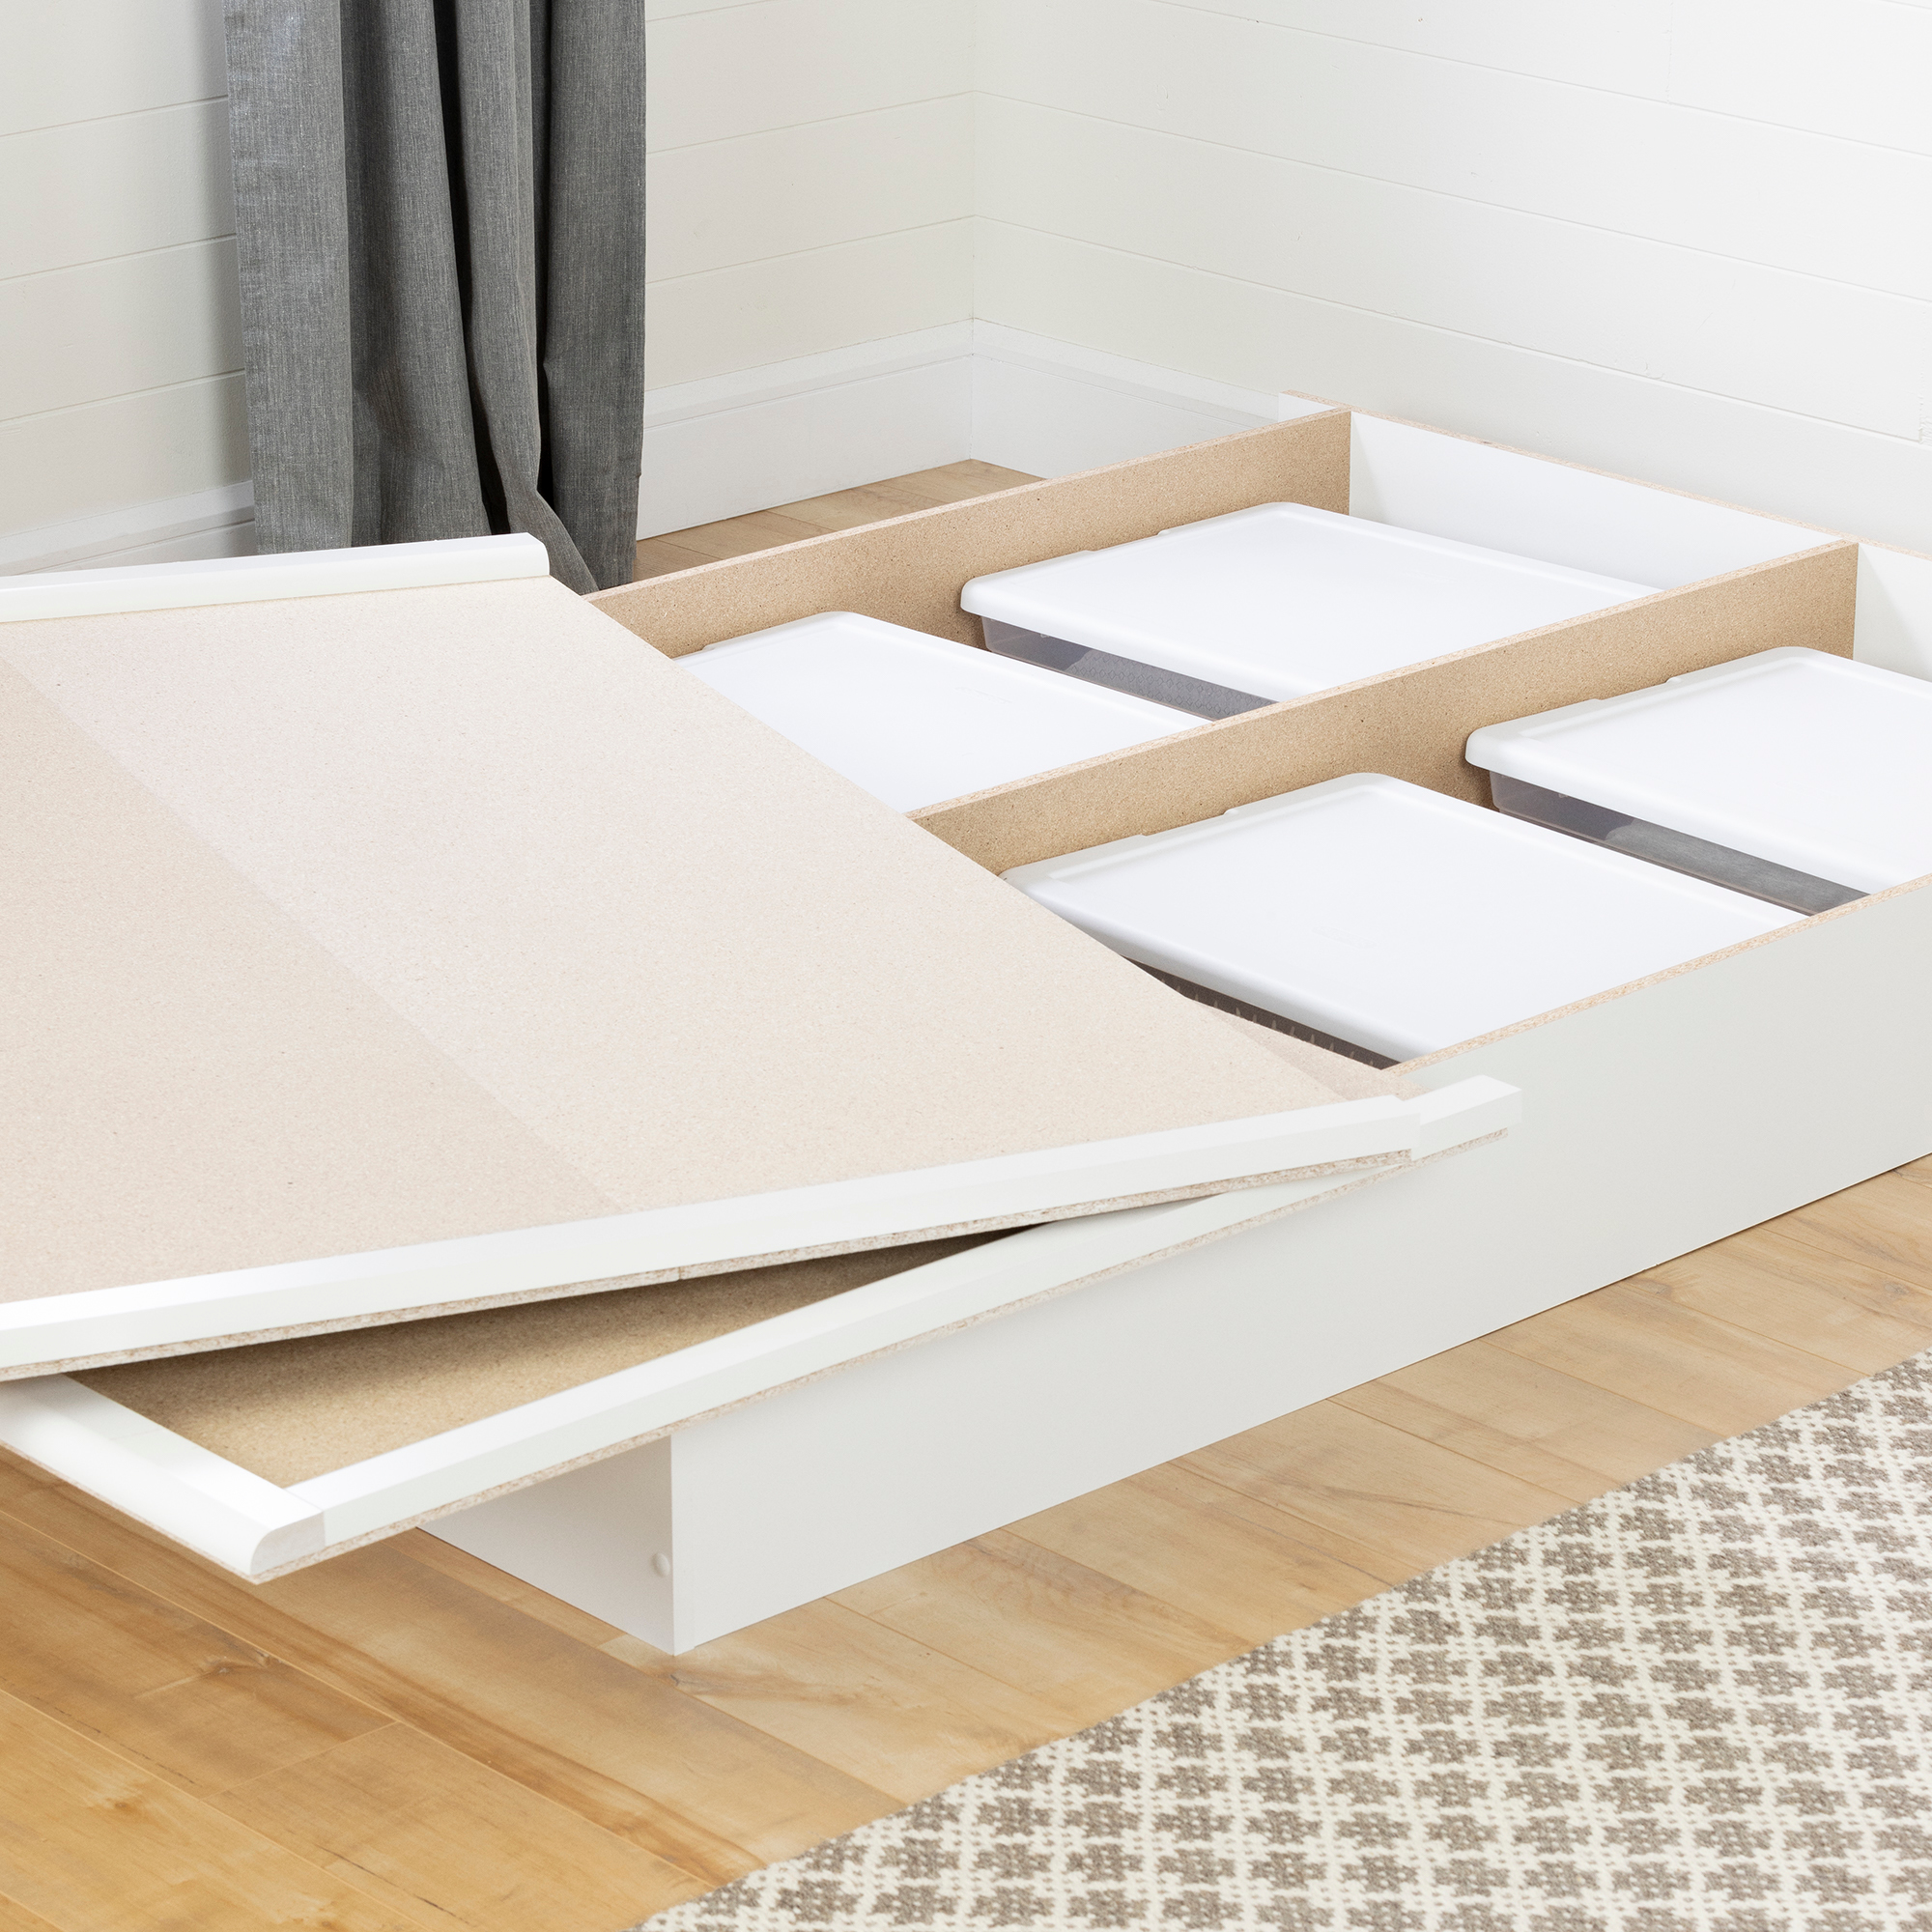 South Shore Basics Platform Bed with Molding, Pure White, Full - image 3 of 6